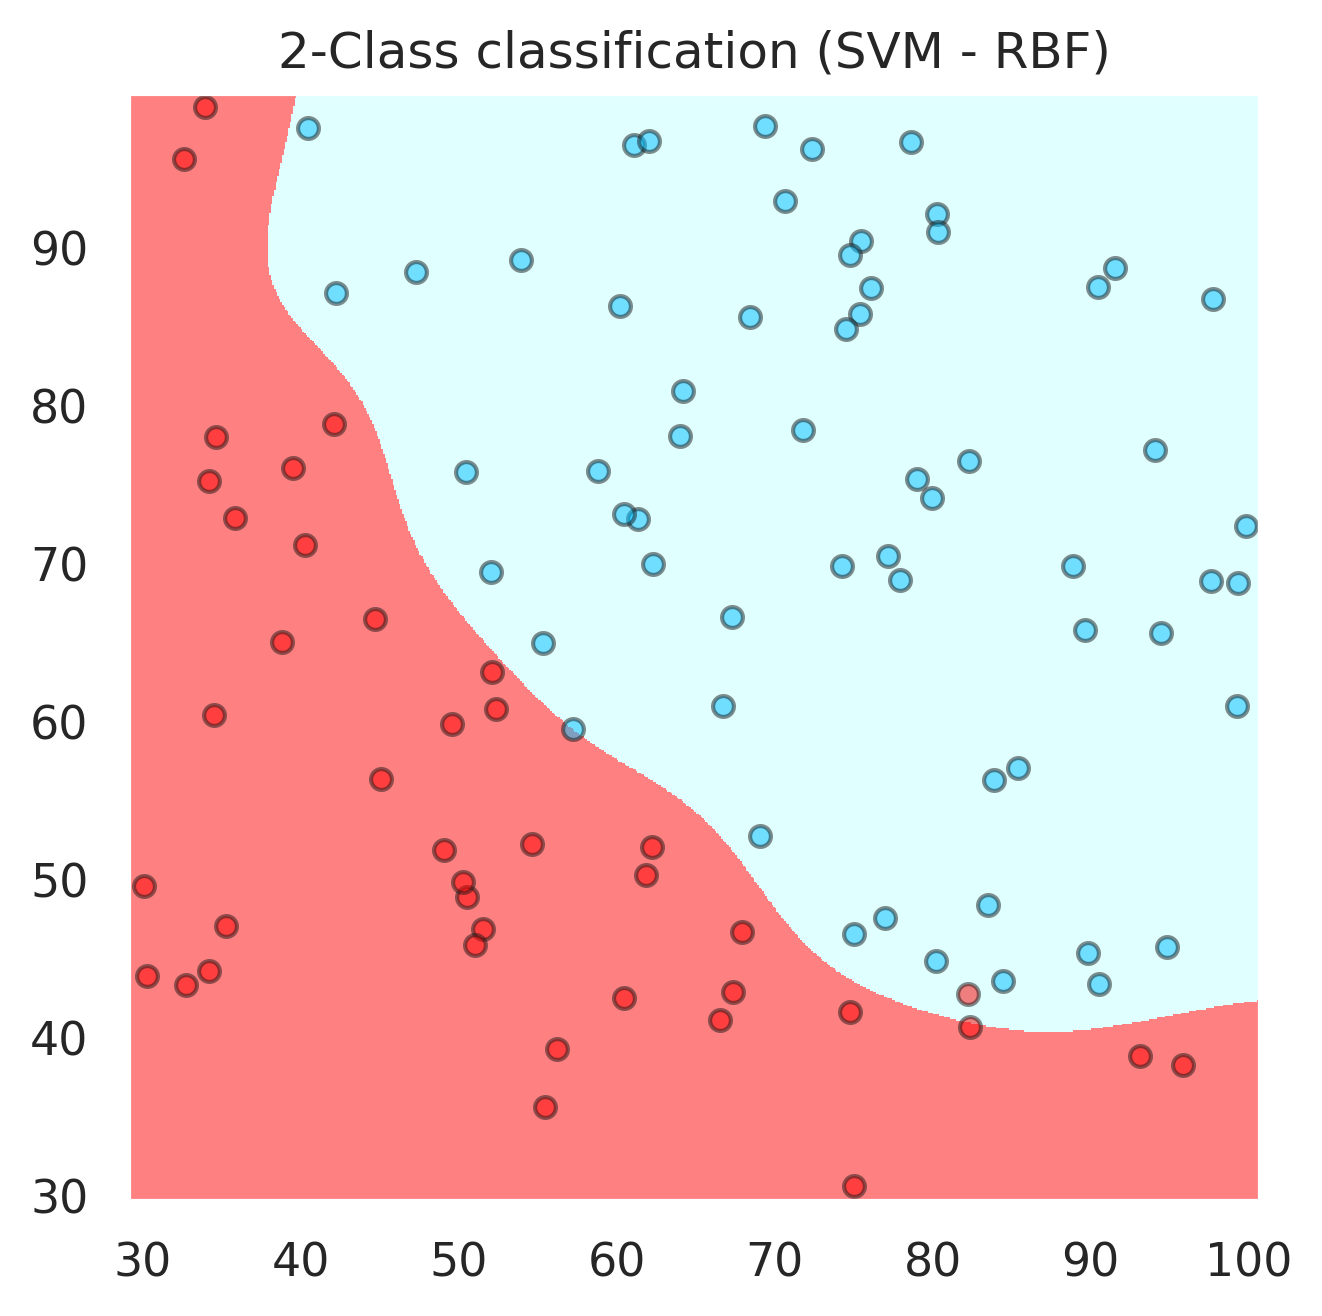 _images/Supervised_Learning_Logistic_Regression_38_0.png